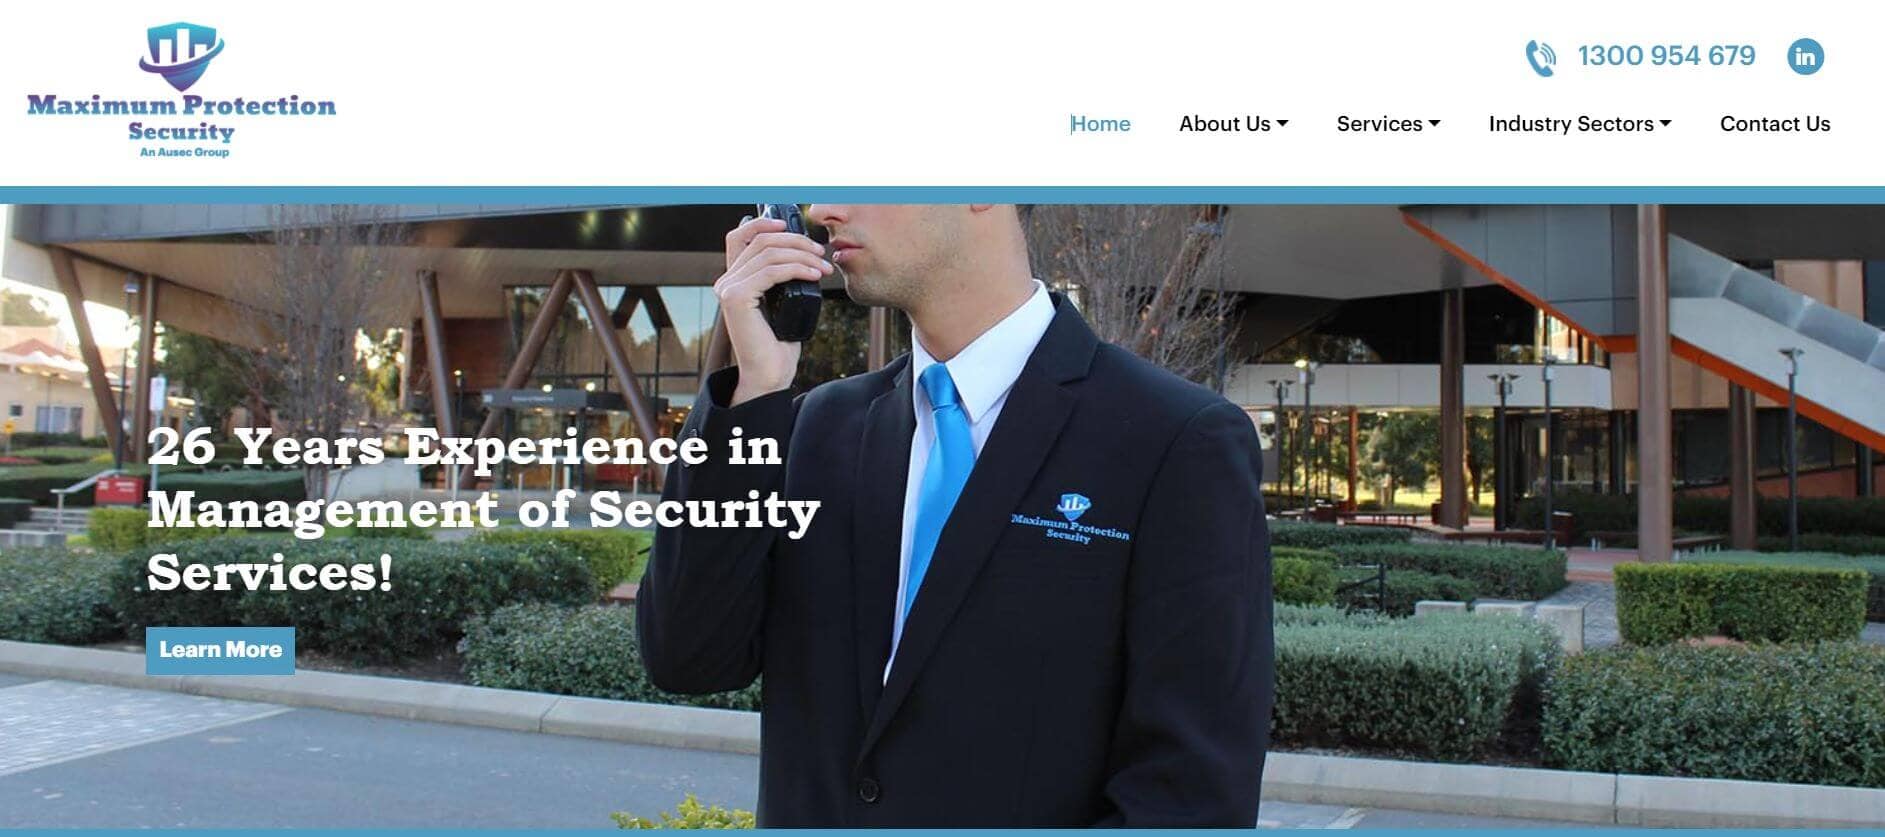 maximum protection security security guard company sydney